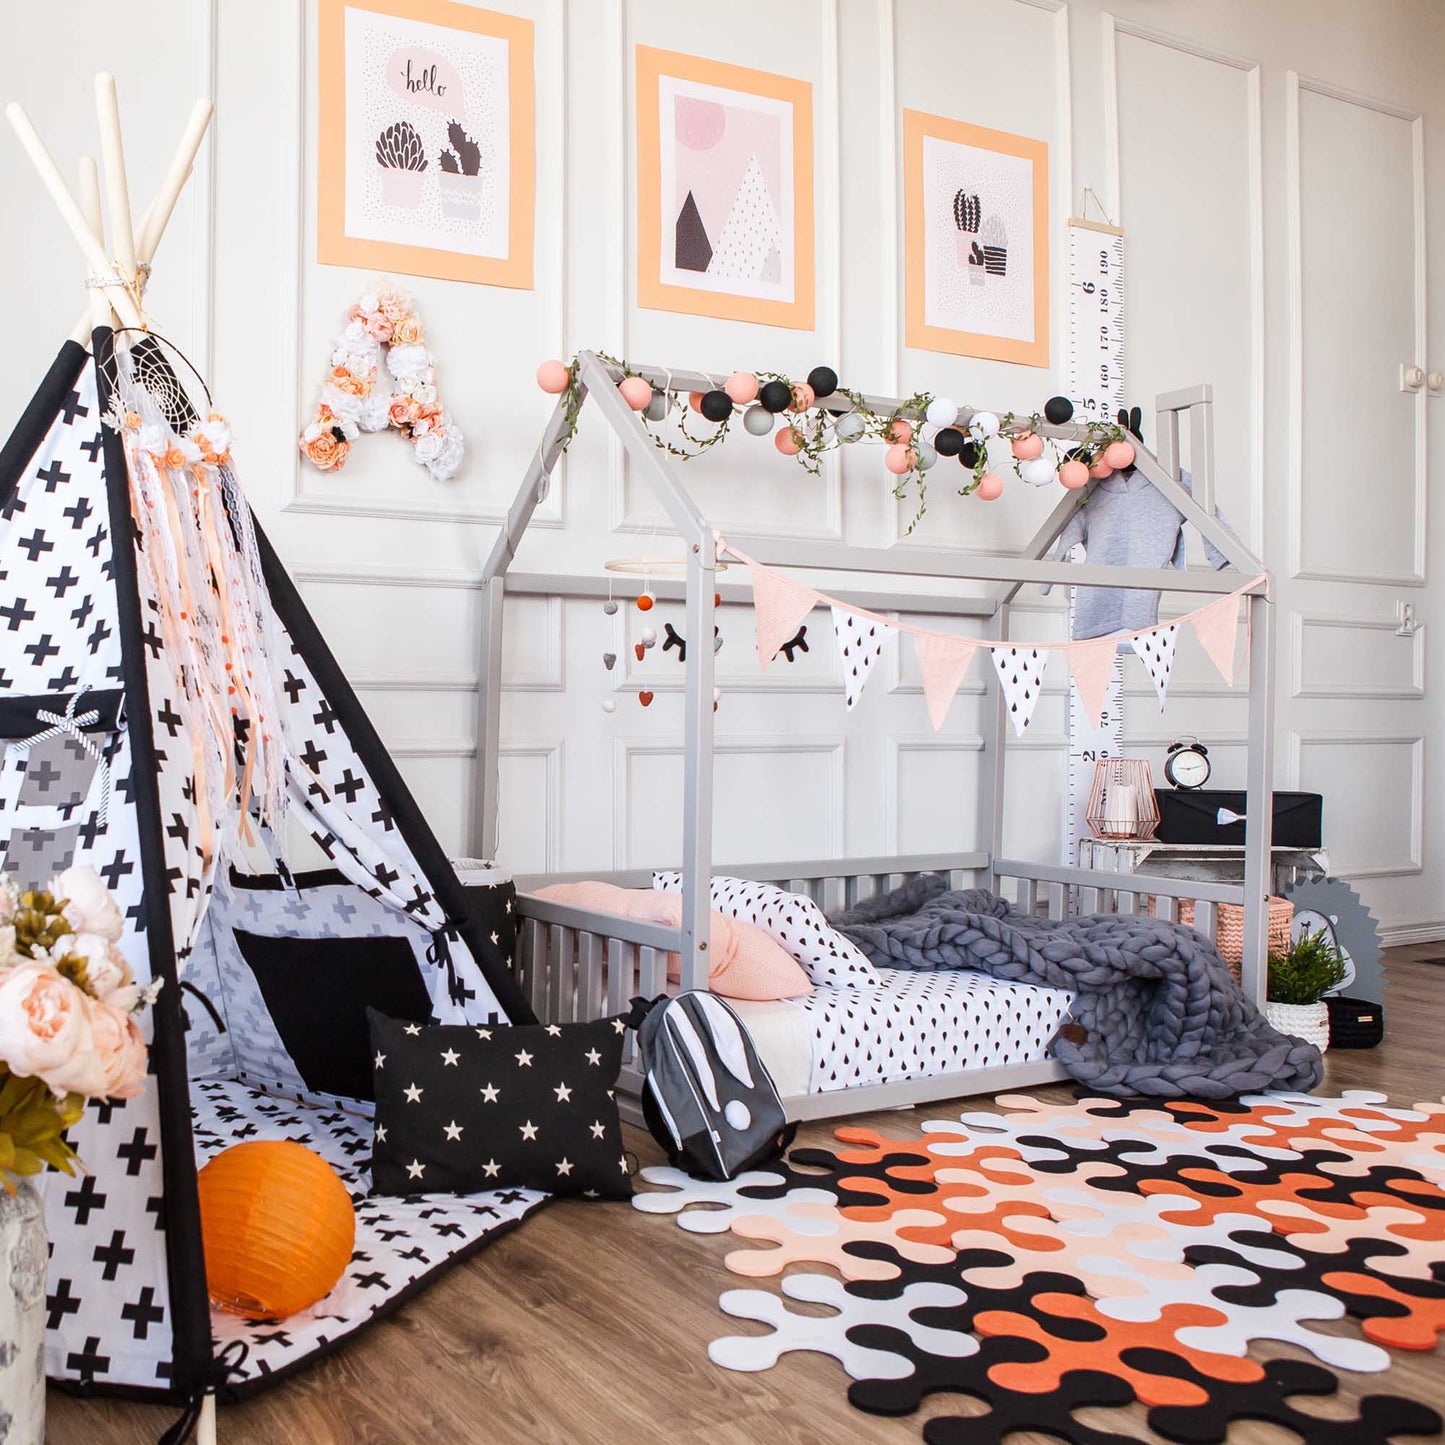 A Sweet Home From Wood Kids' house-frame bed with 3-sided rails transforms a child's room into a cozy sleep haven complete with a teepee, polka dots, and a cuddly teddy bear.